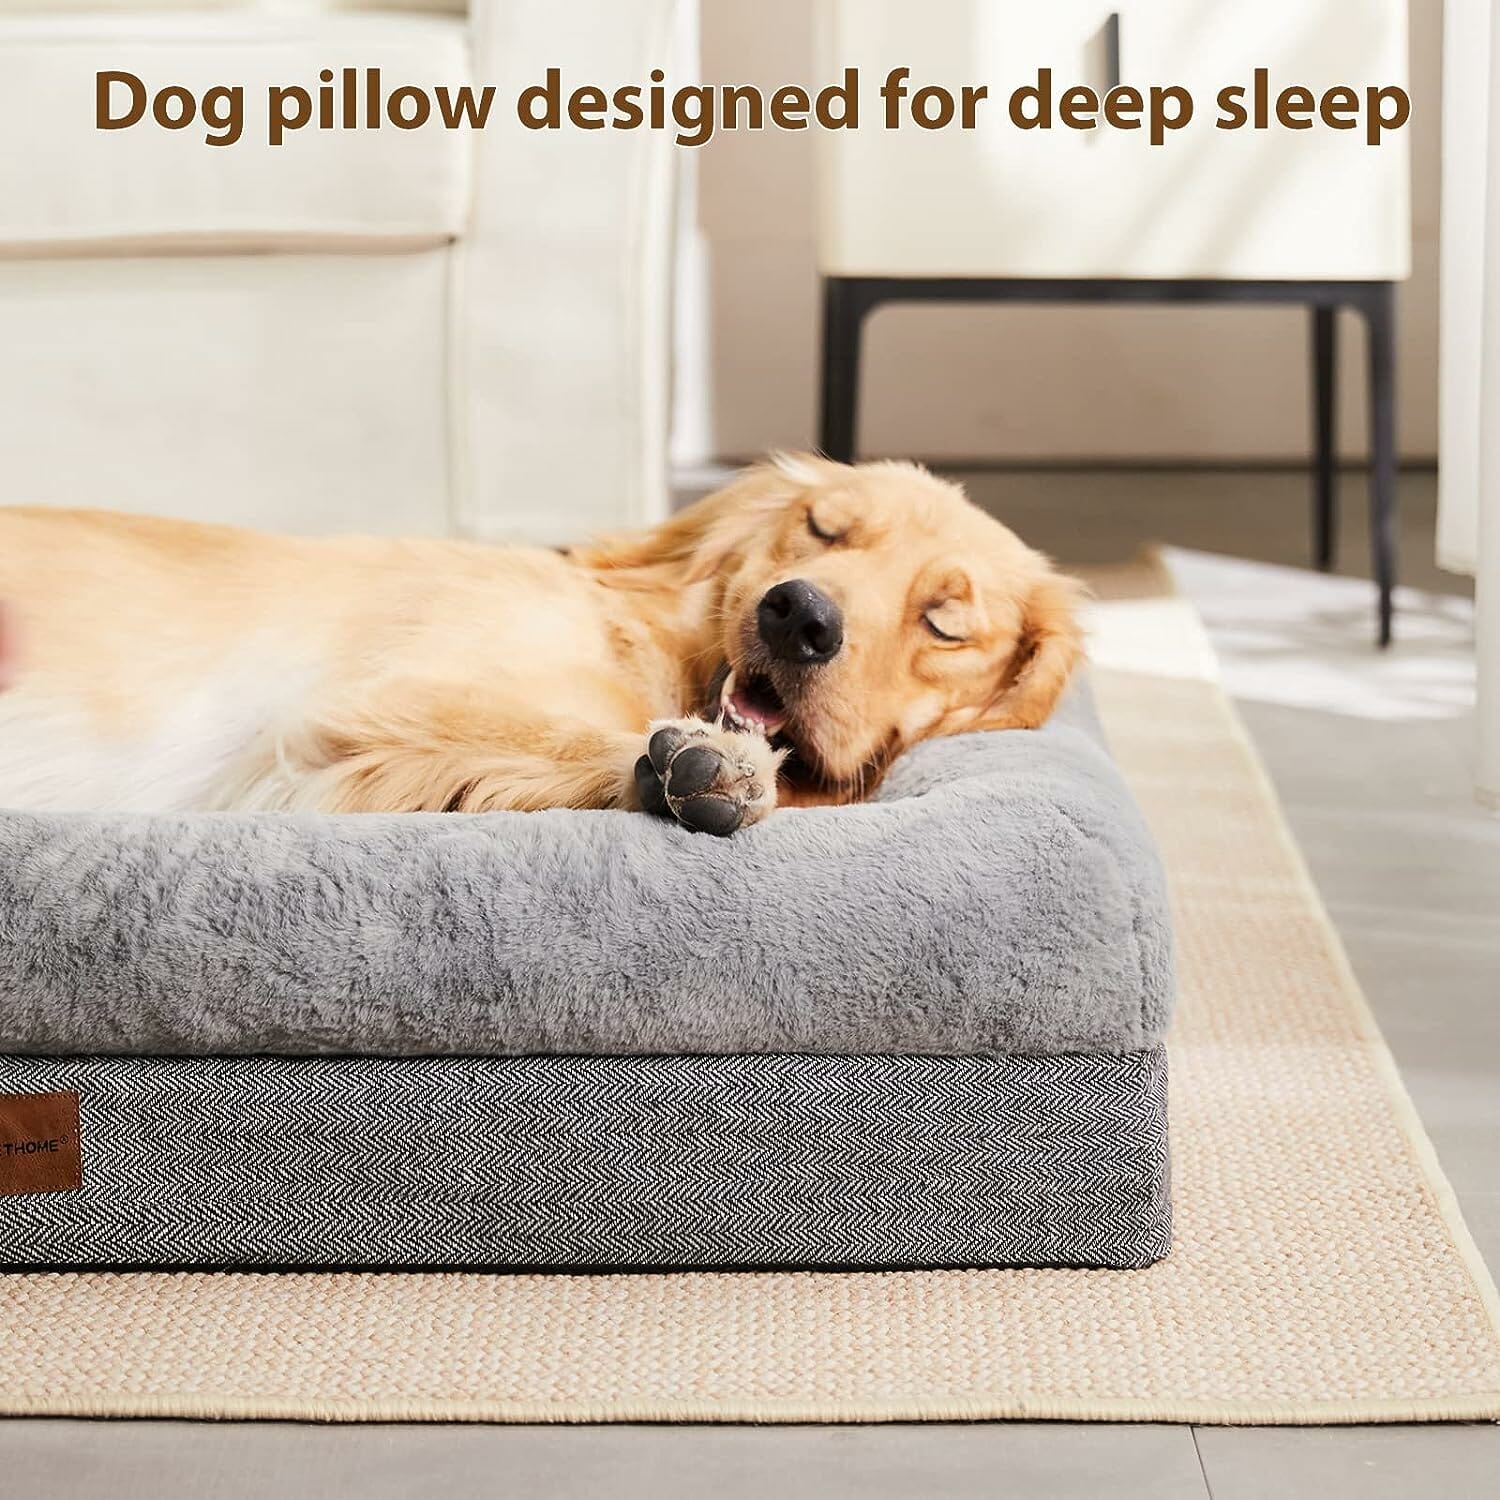 BFPETHOME Sofa Dog Bed Review – The Perfect Comfort Solution for Your Pup?